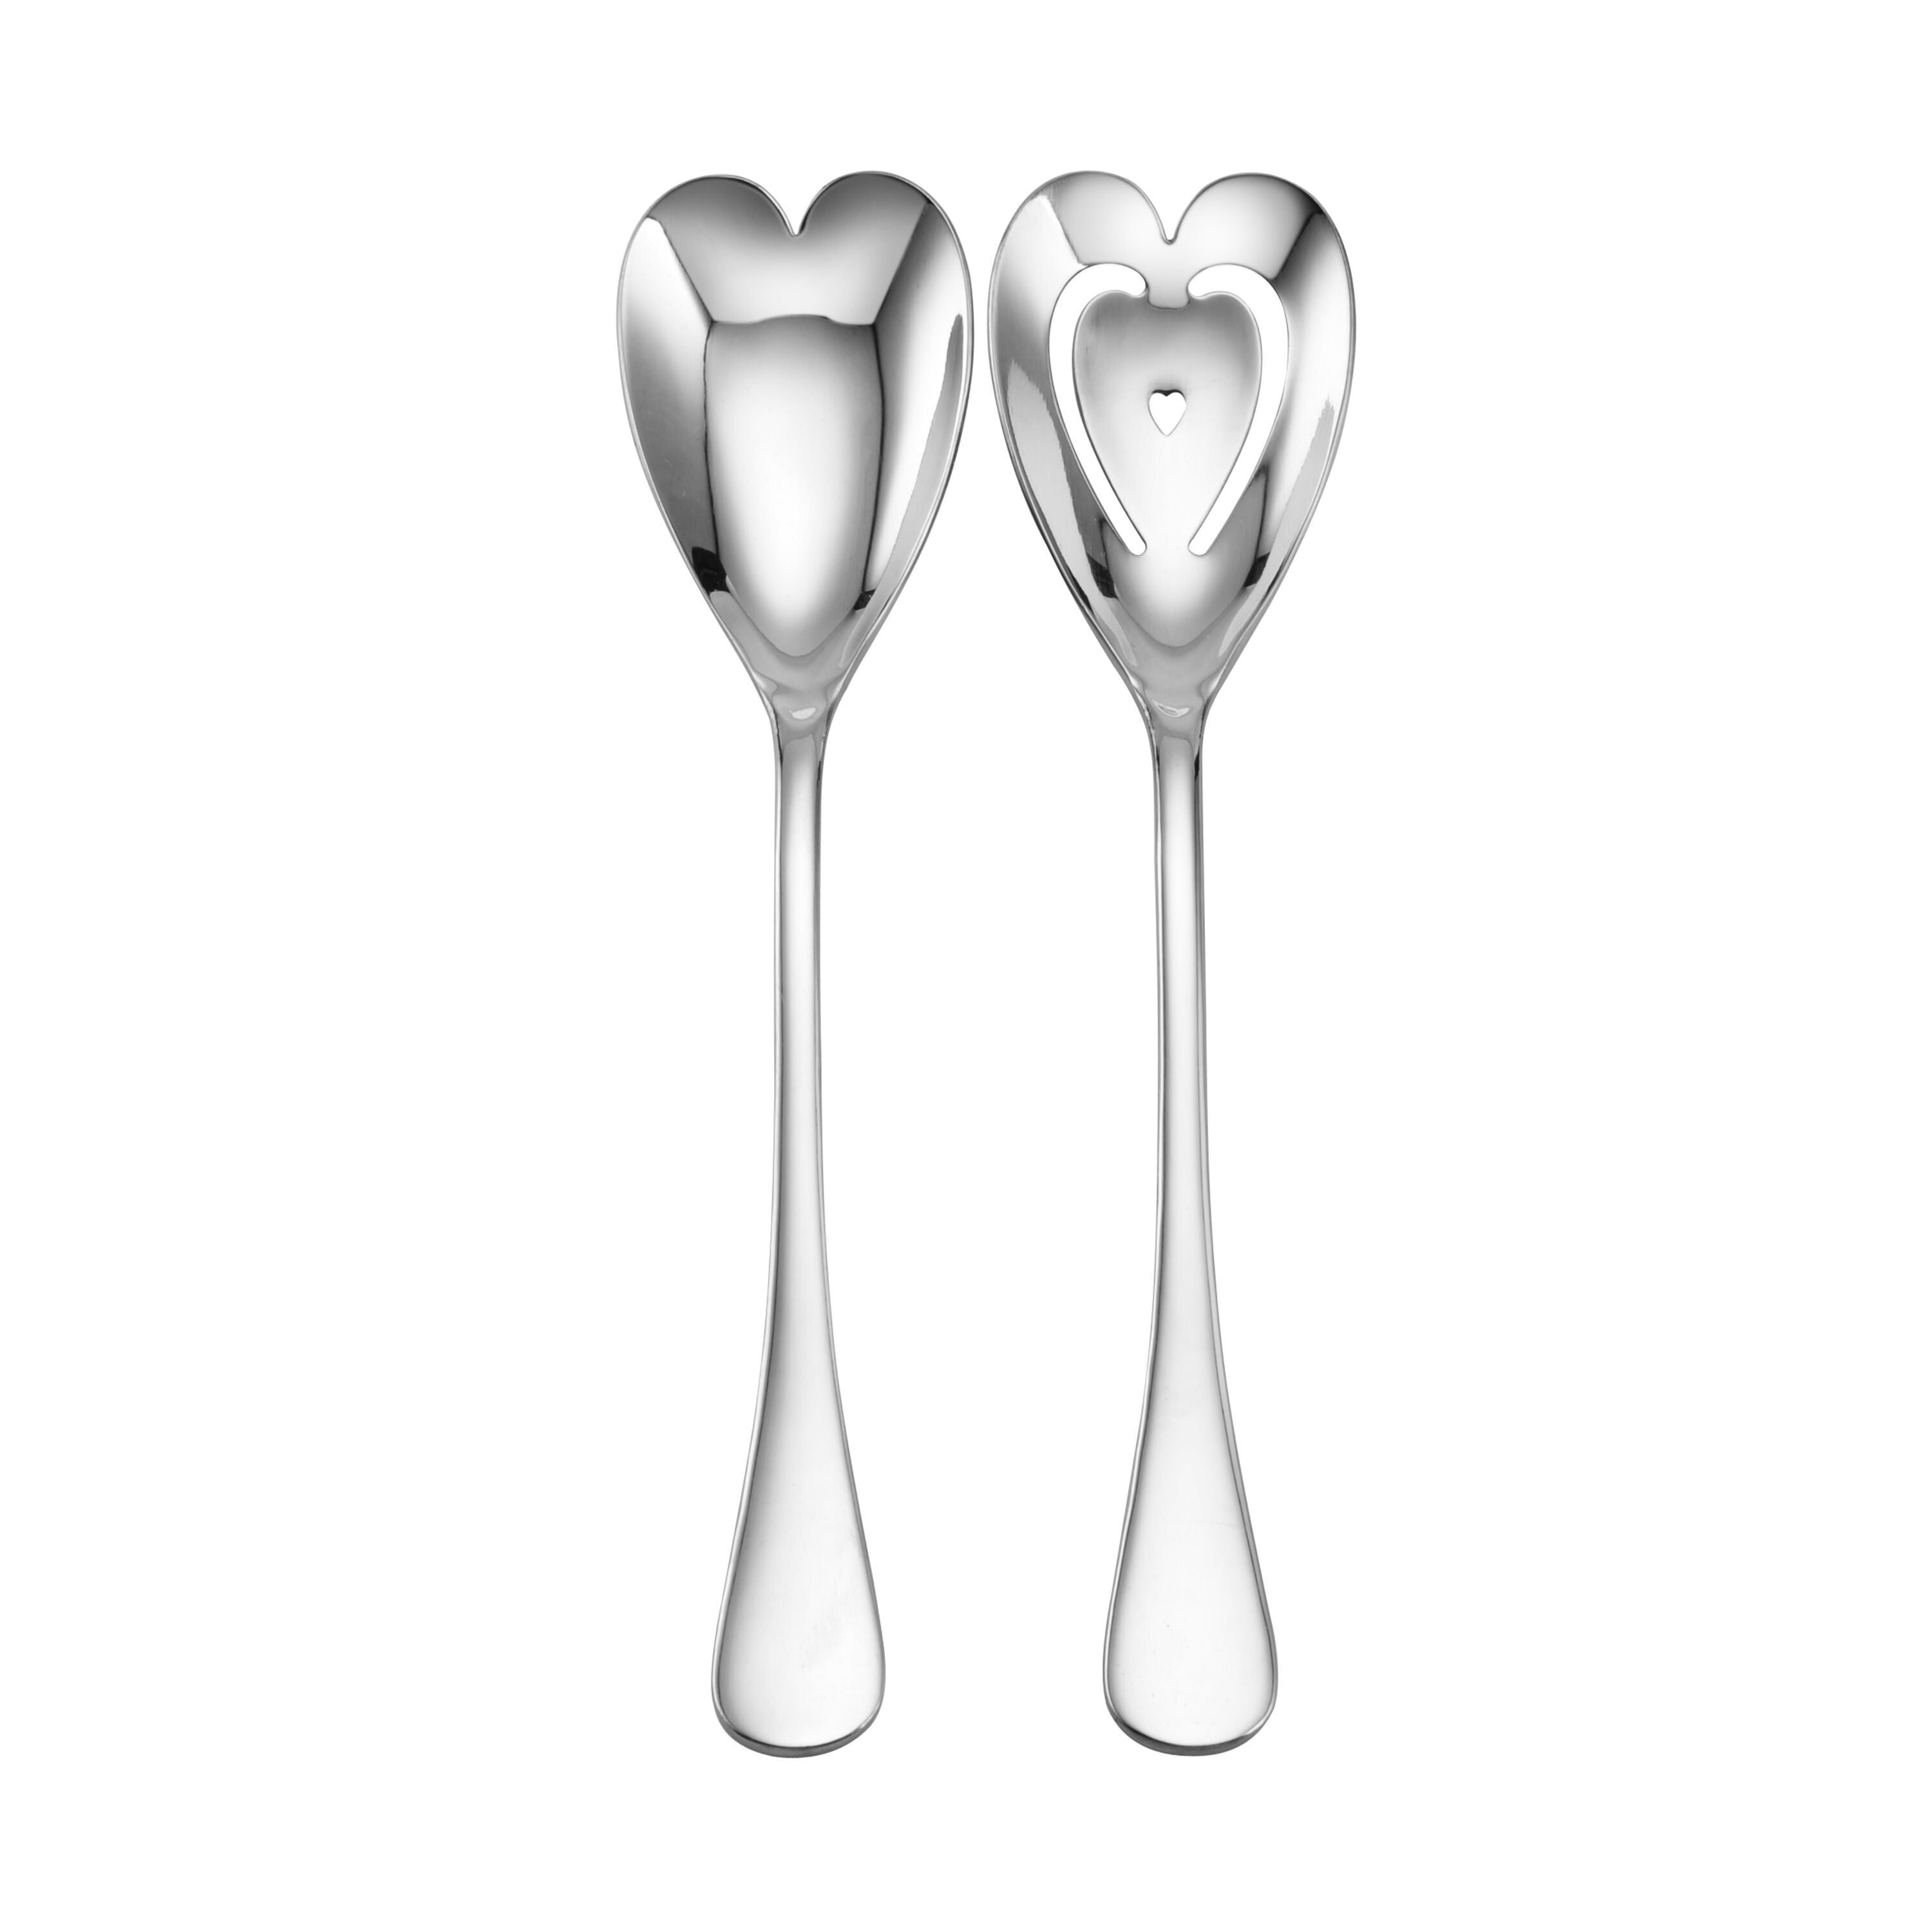 Towle T5271445 Irresistible 18.0 Stainless Steel 2 Piece Serving Set